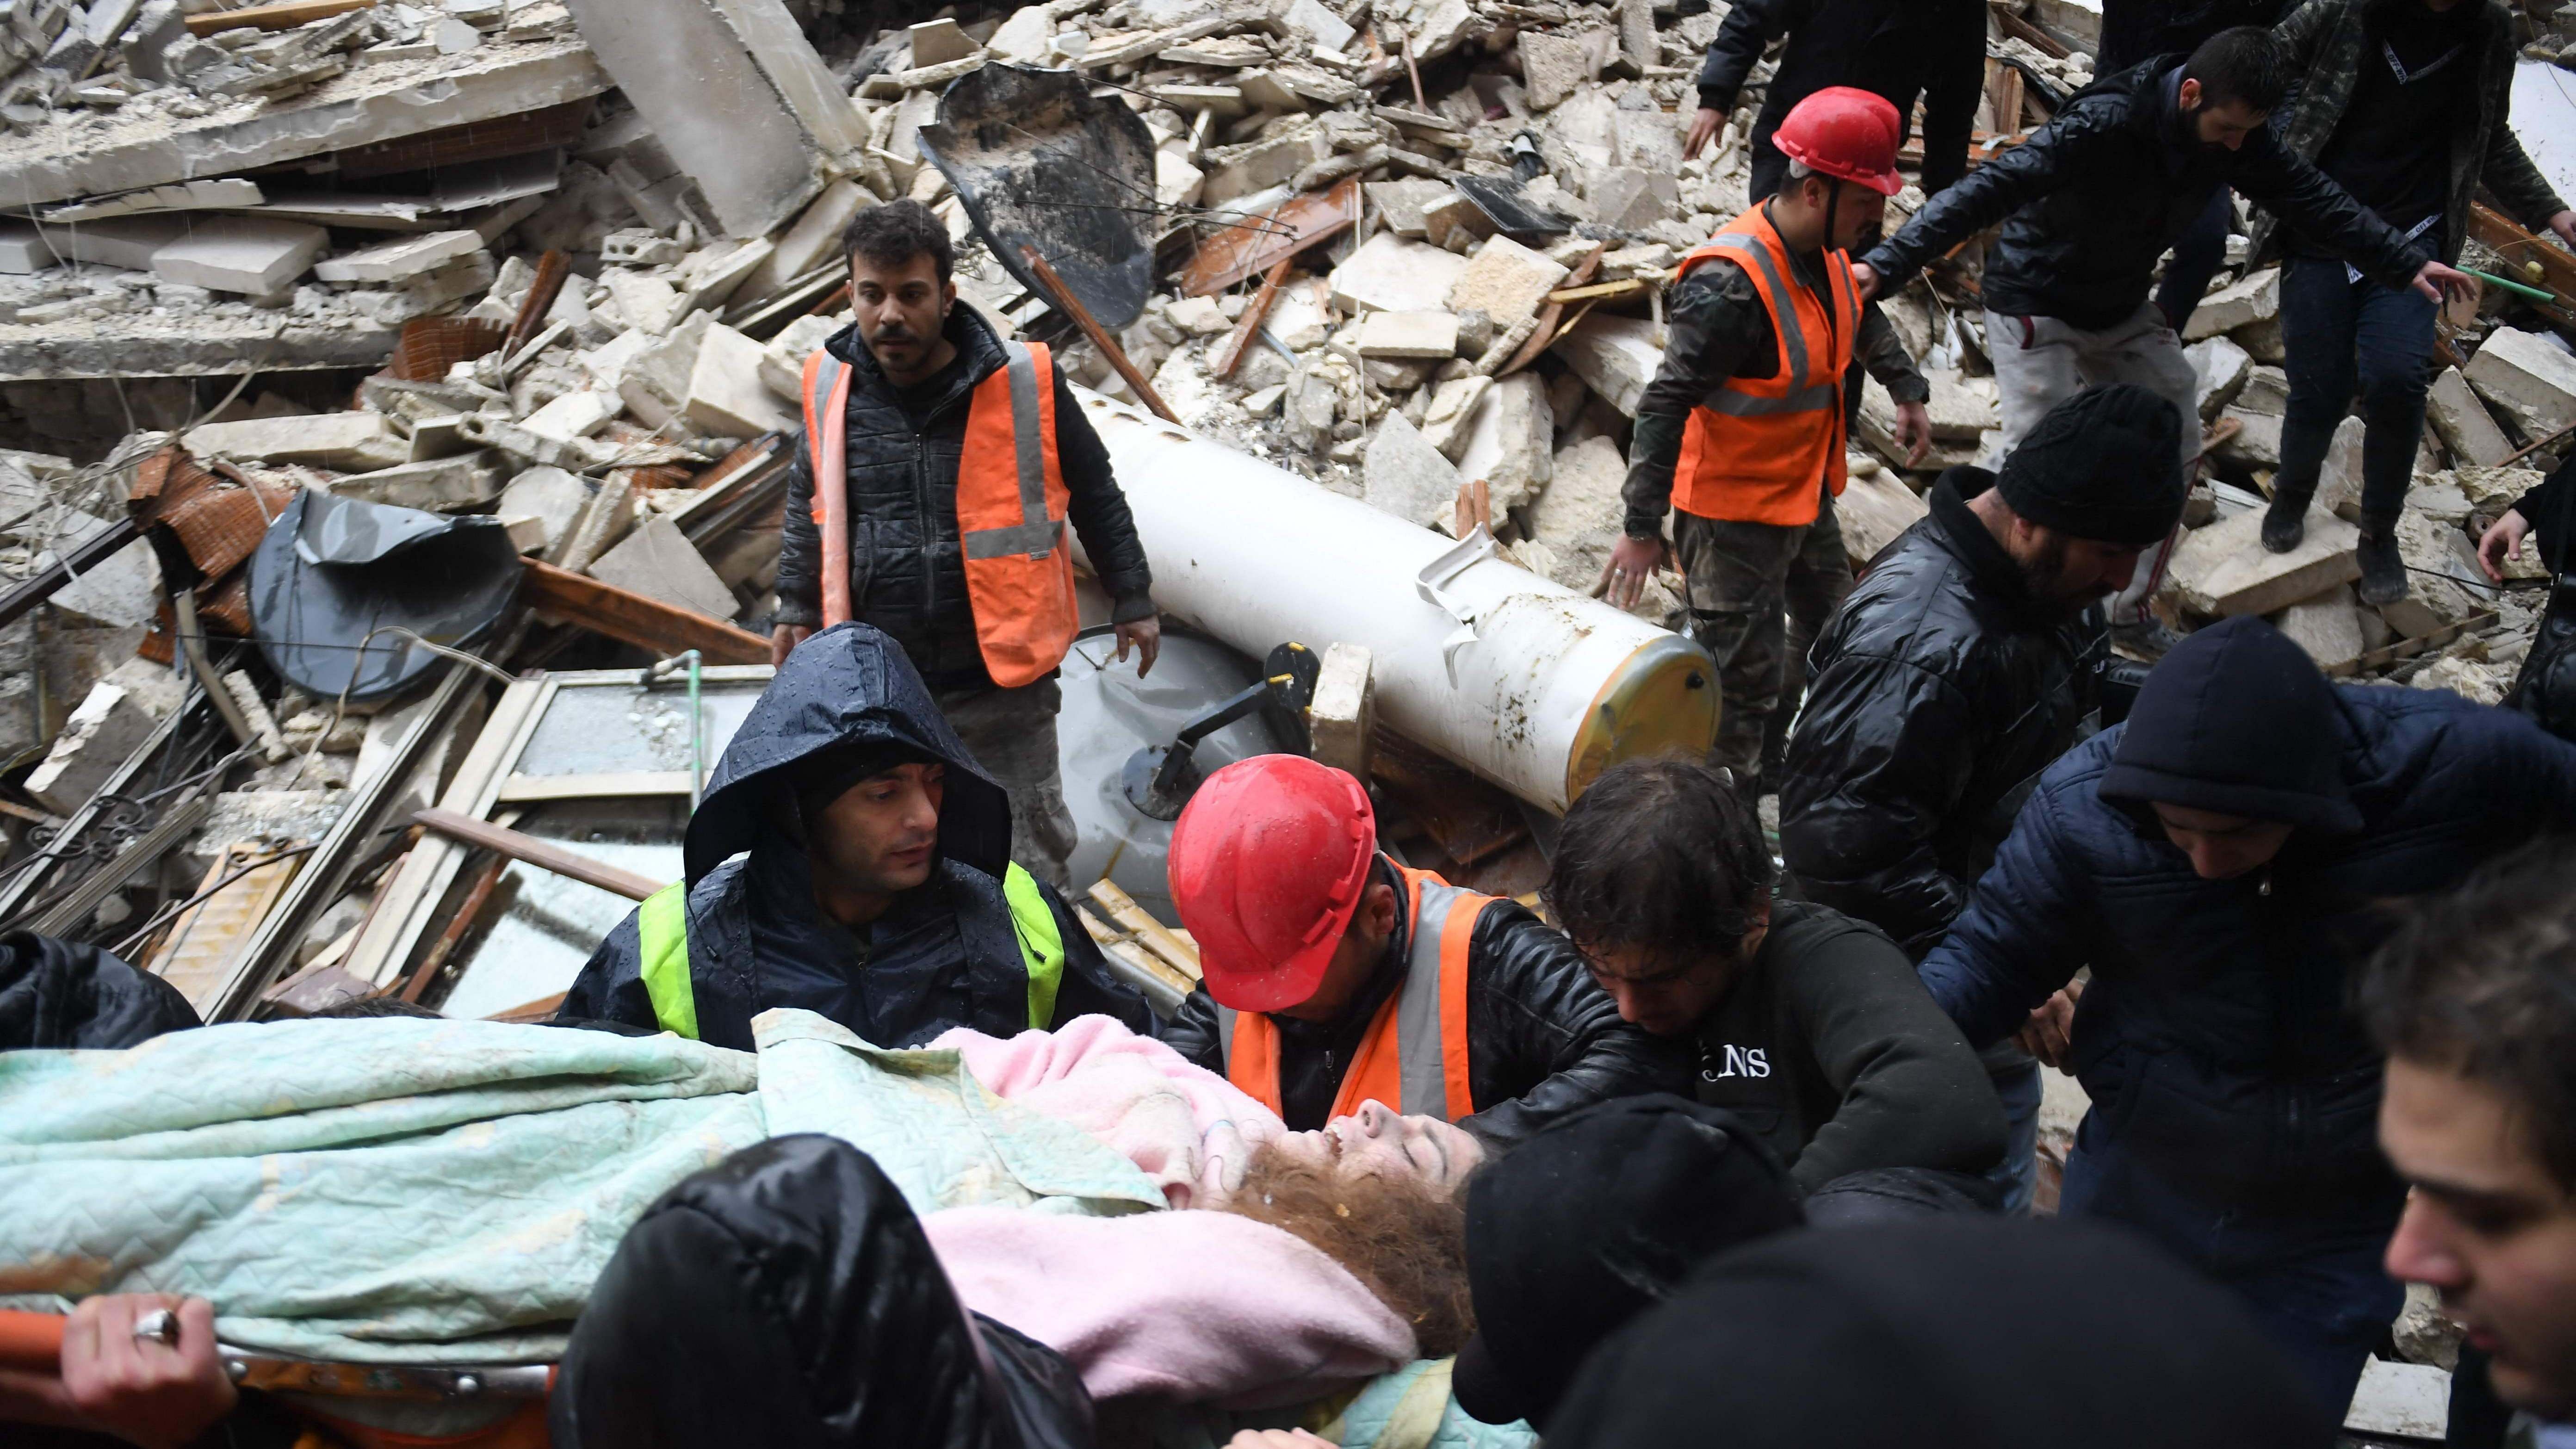 A 7.8-magnitude earthquake hit Turkey and Syria early on February 6, killing hundreds of people. Credit: AFP Photo